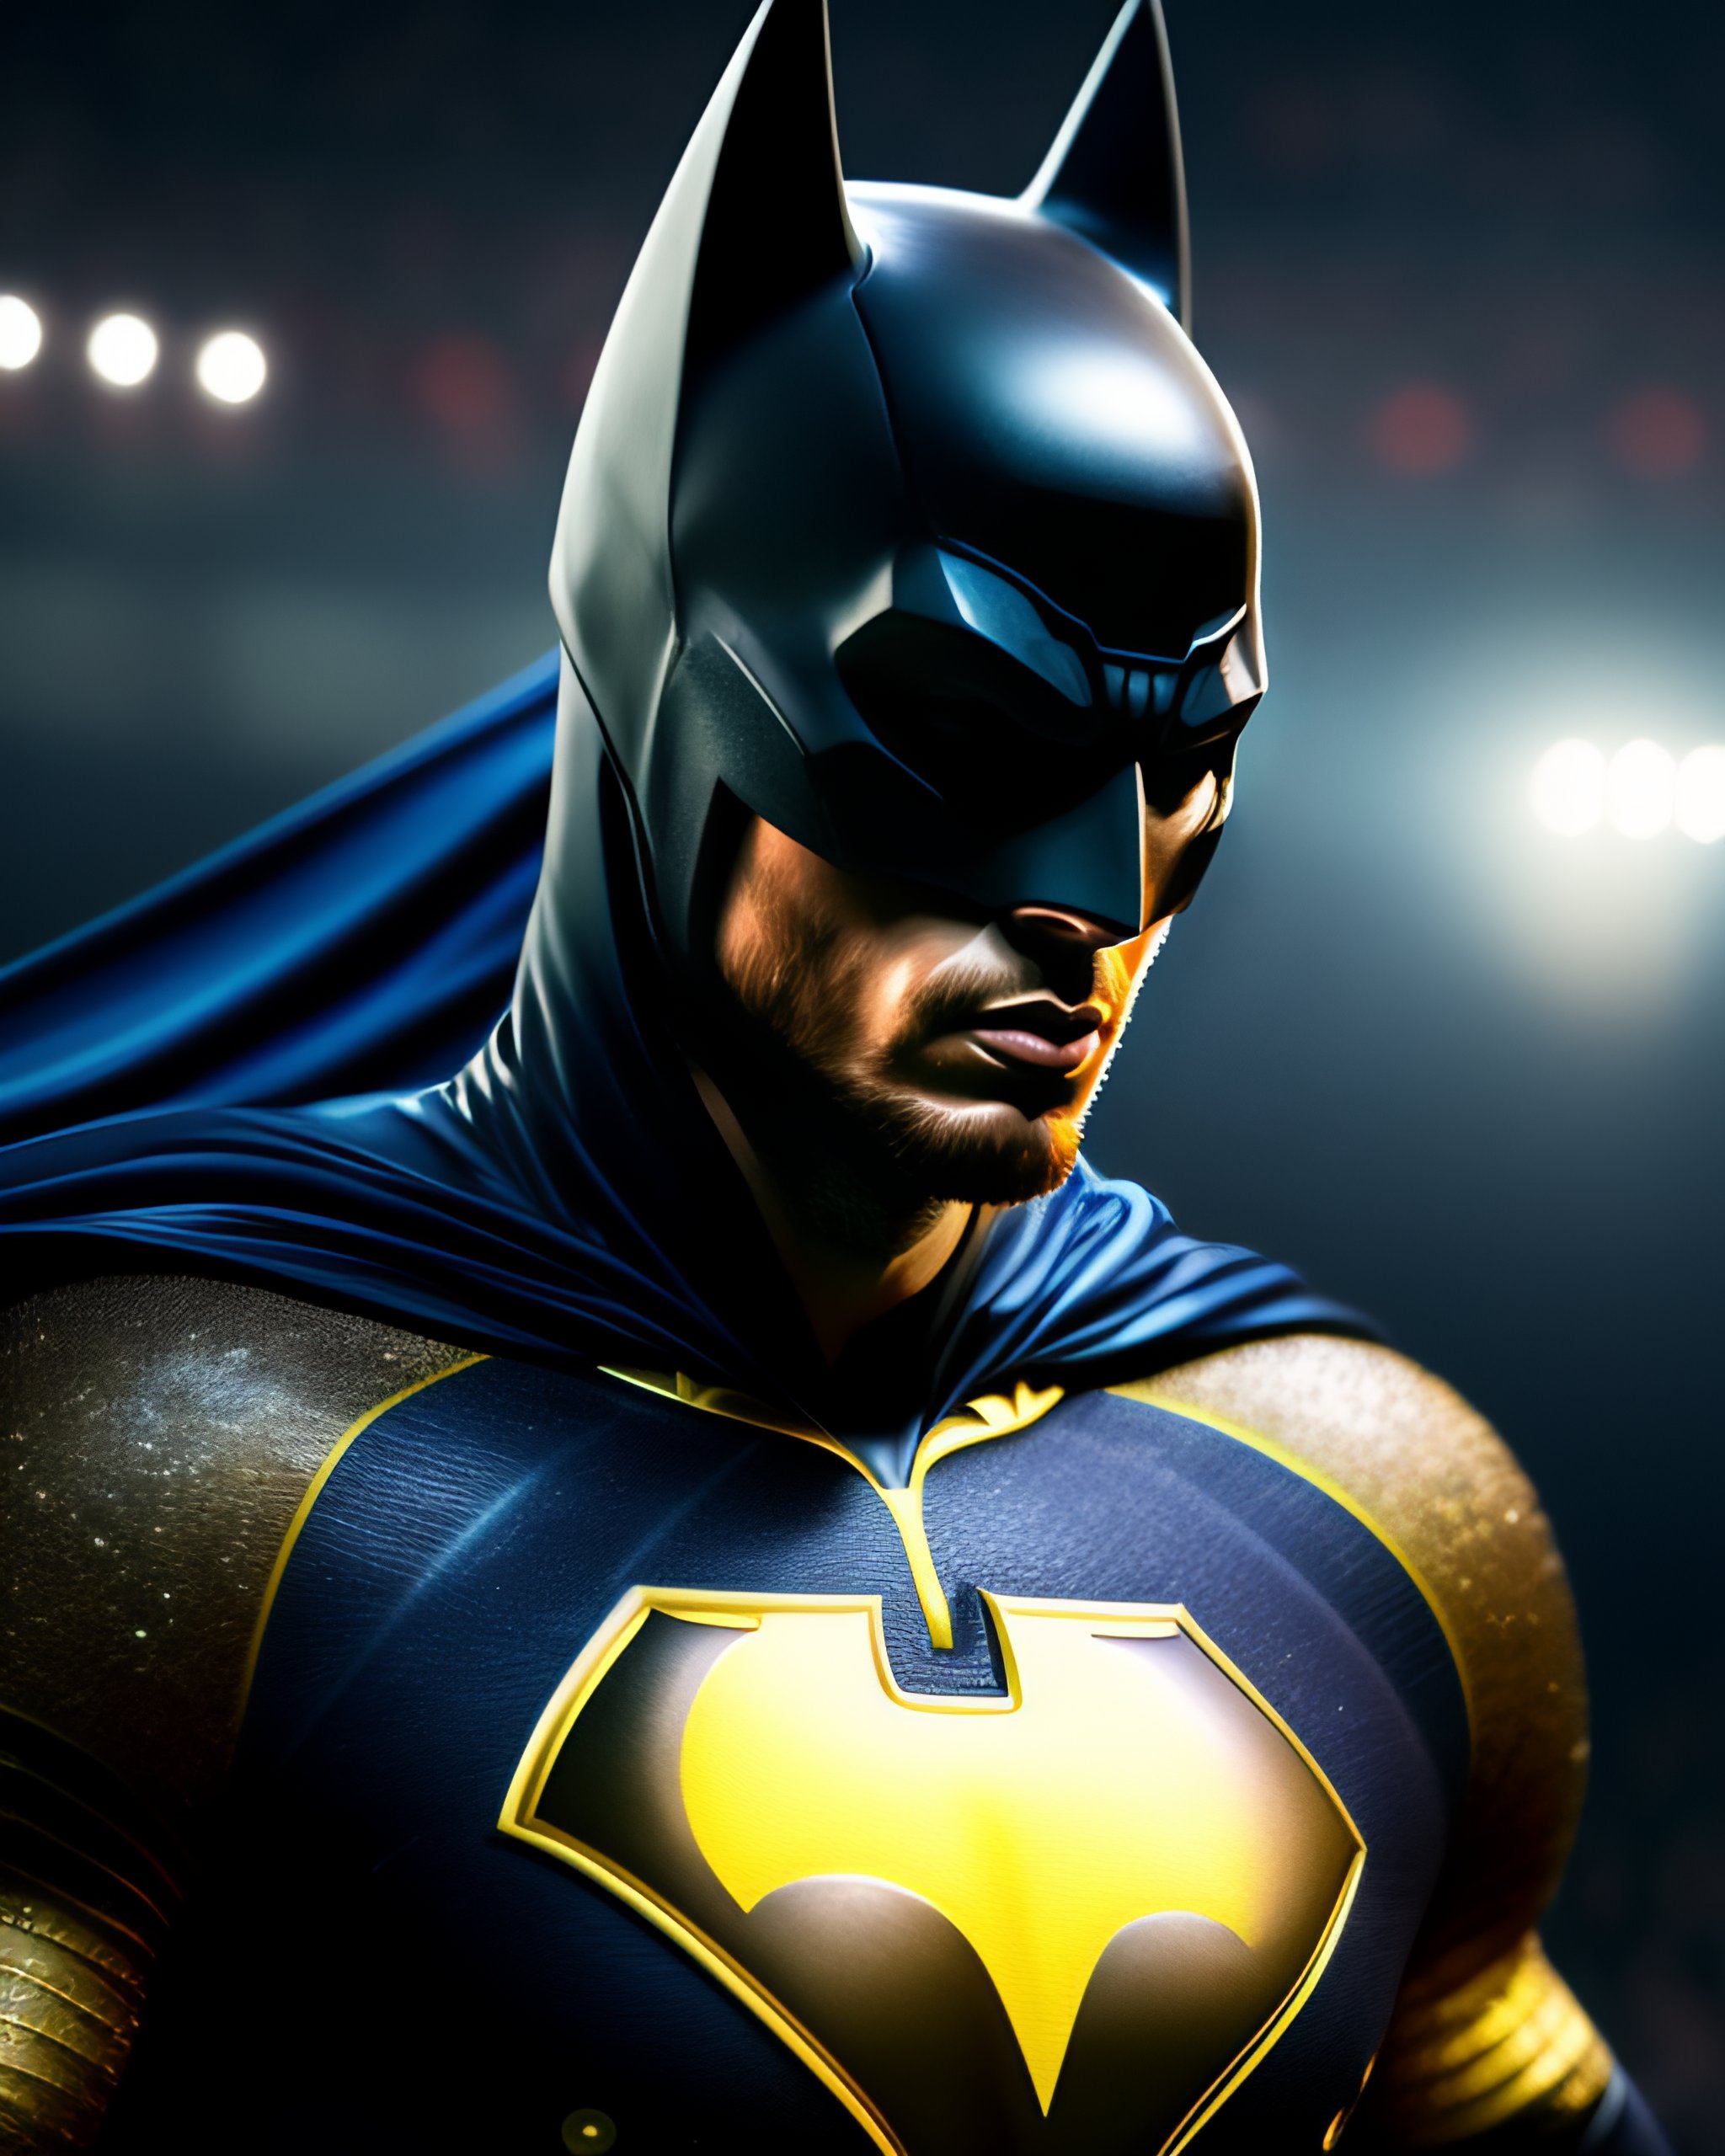 Lexica - Leo messi as Batman, full hd image and full body and real  presentation